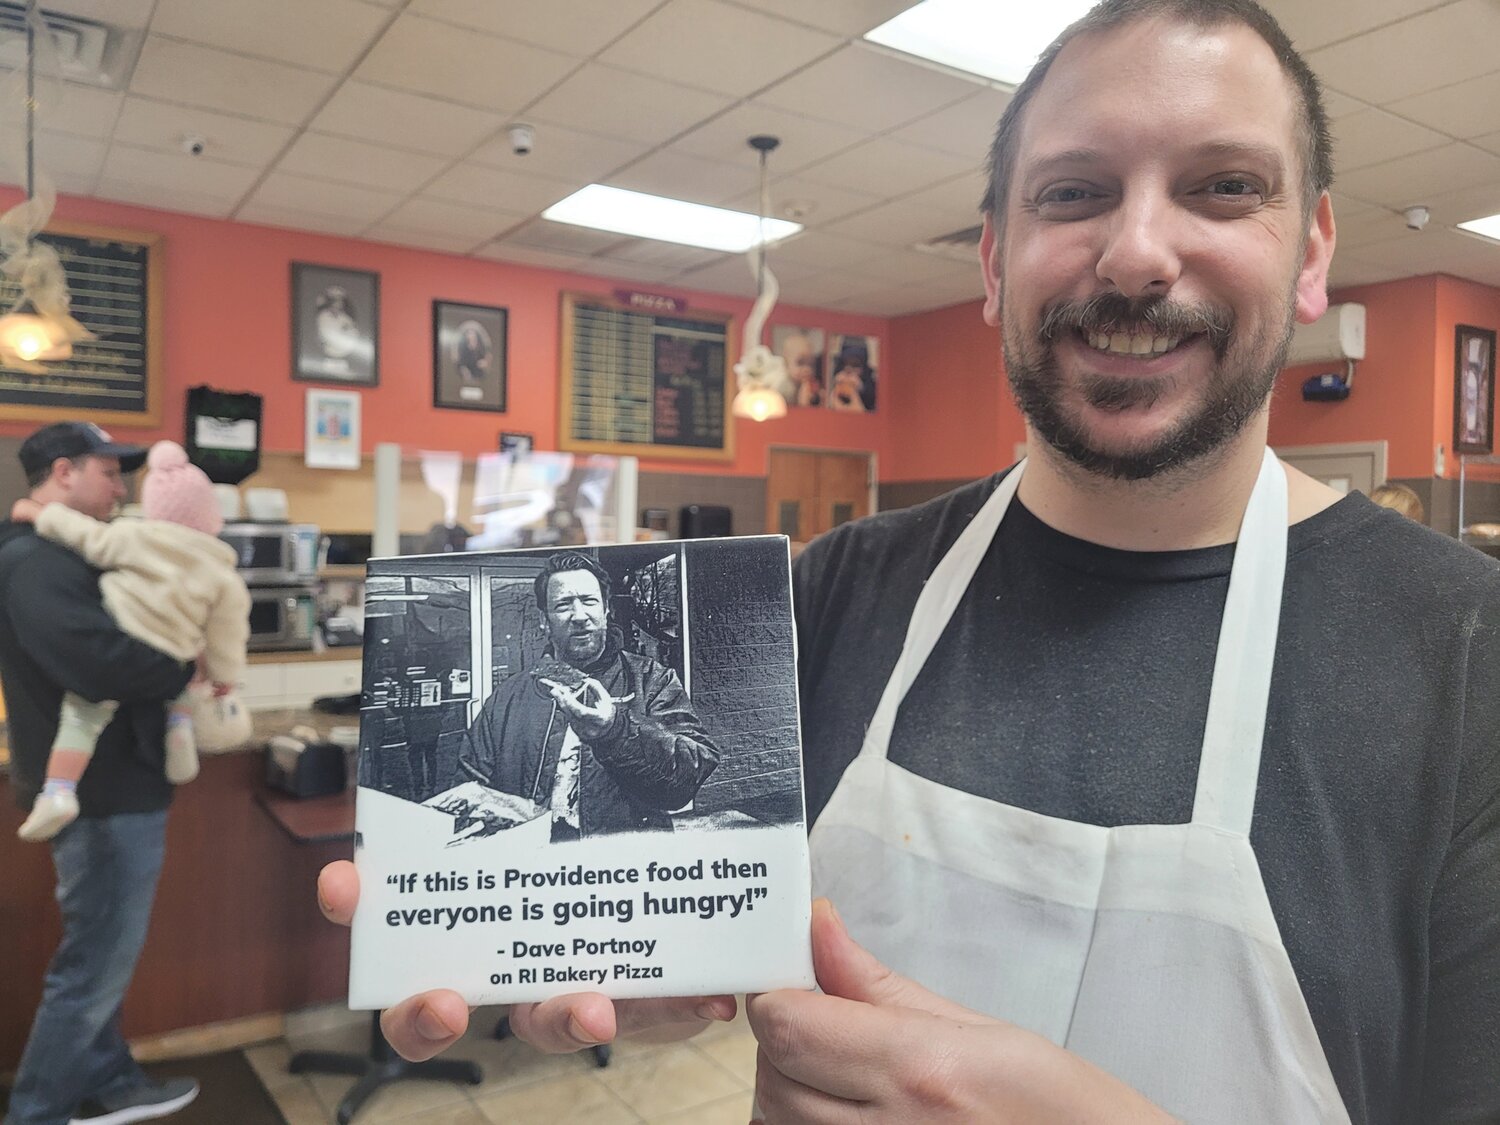 TILE TRIGGERS A SMILE: A friend of Eric Palmieri, of D. Palmieri’s Bakery in Johnston, immortalized a quote from Dave Portnoy’s visit on a ceramic tile, which will now be kept in a place of honor.